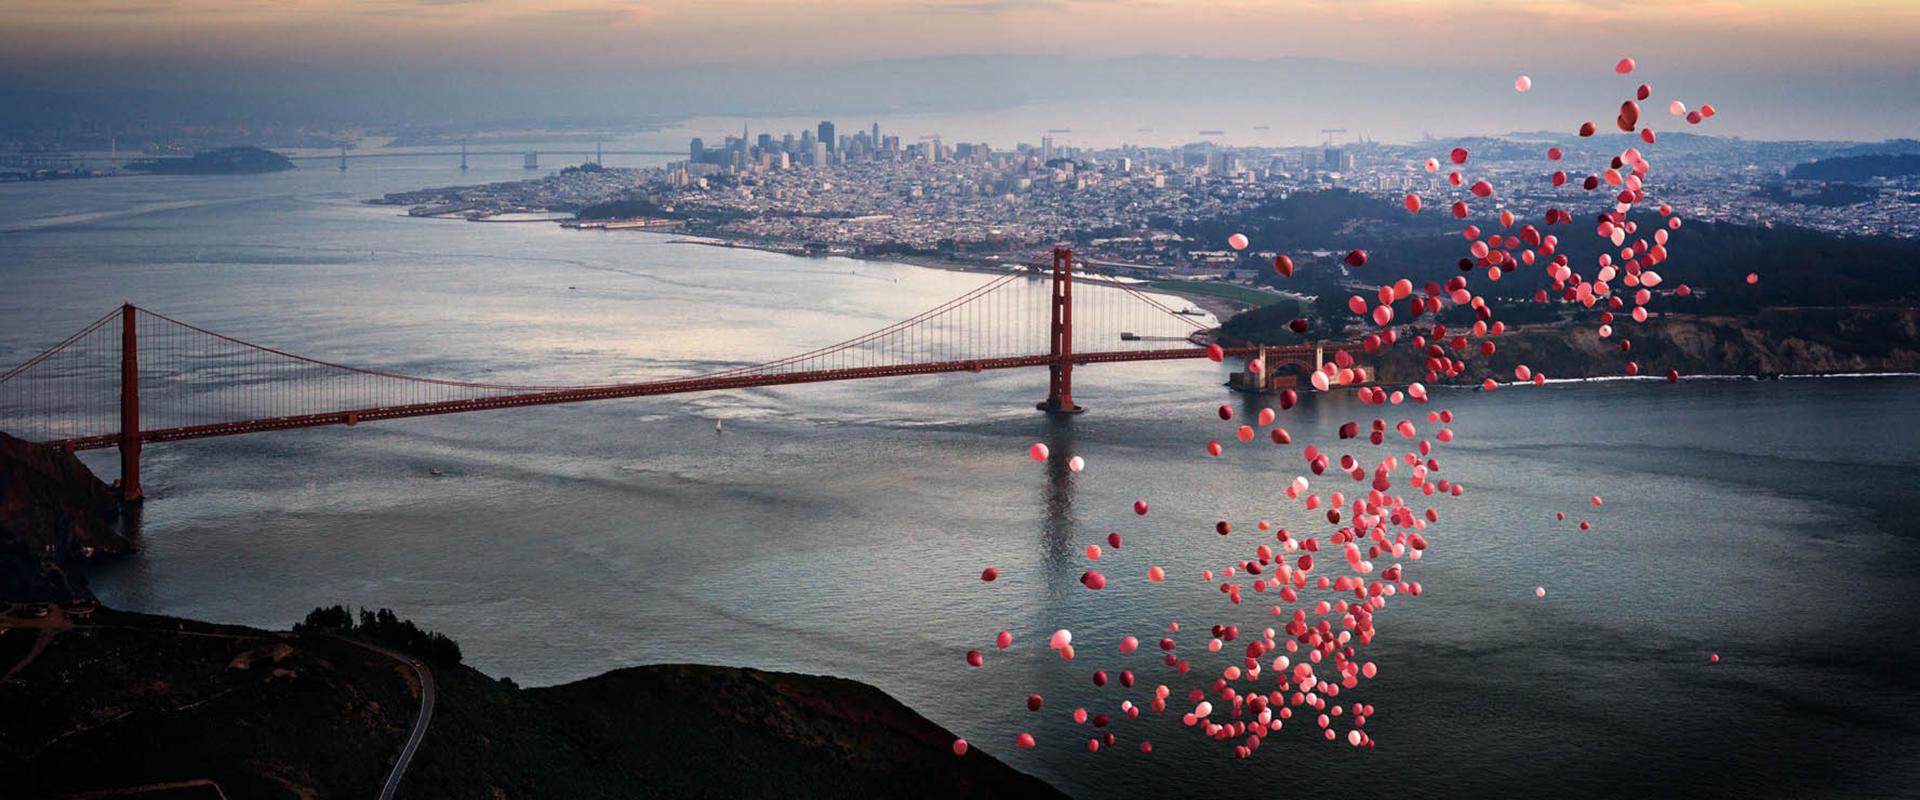 Balloons over San Fransisco, 21st Century, Contemporary, Cityscapes